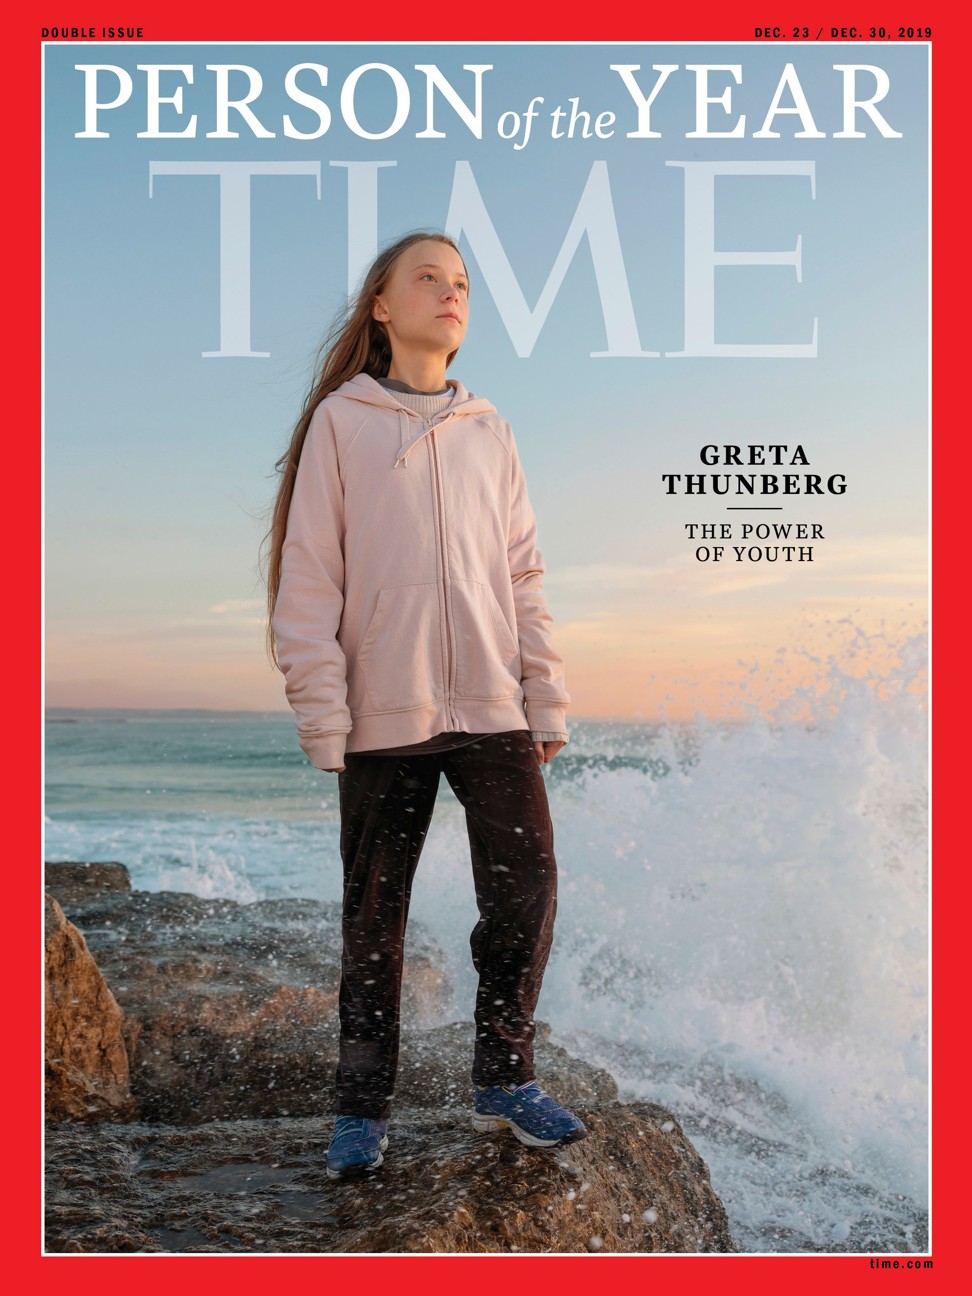 Greta Thunberg was announced as Time magazine's 2019 Person of the Year. Photo: Time/AFP